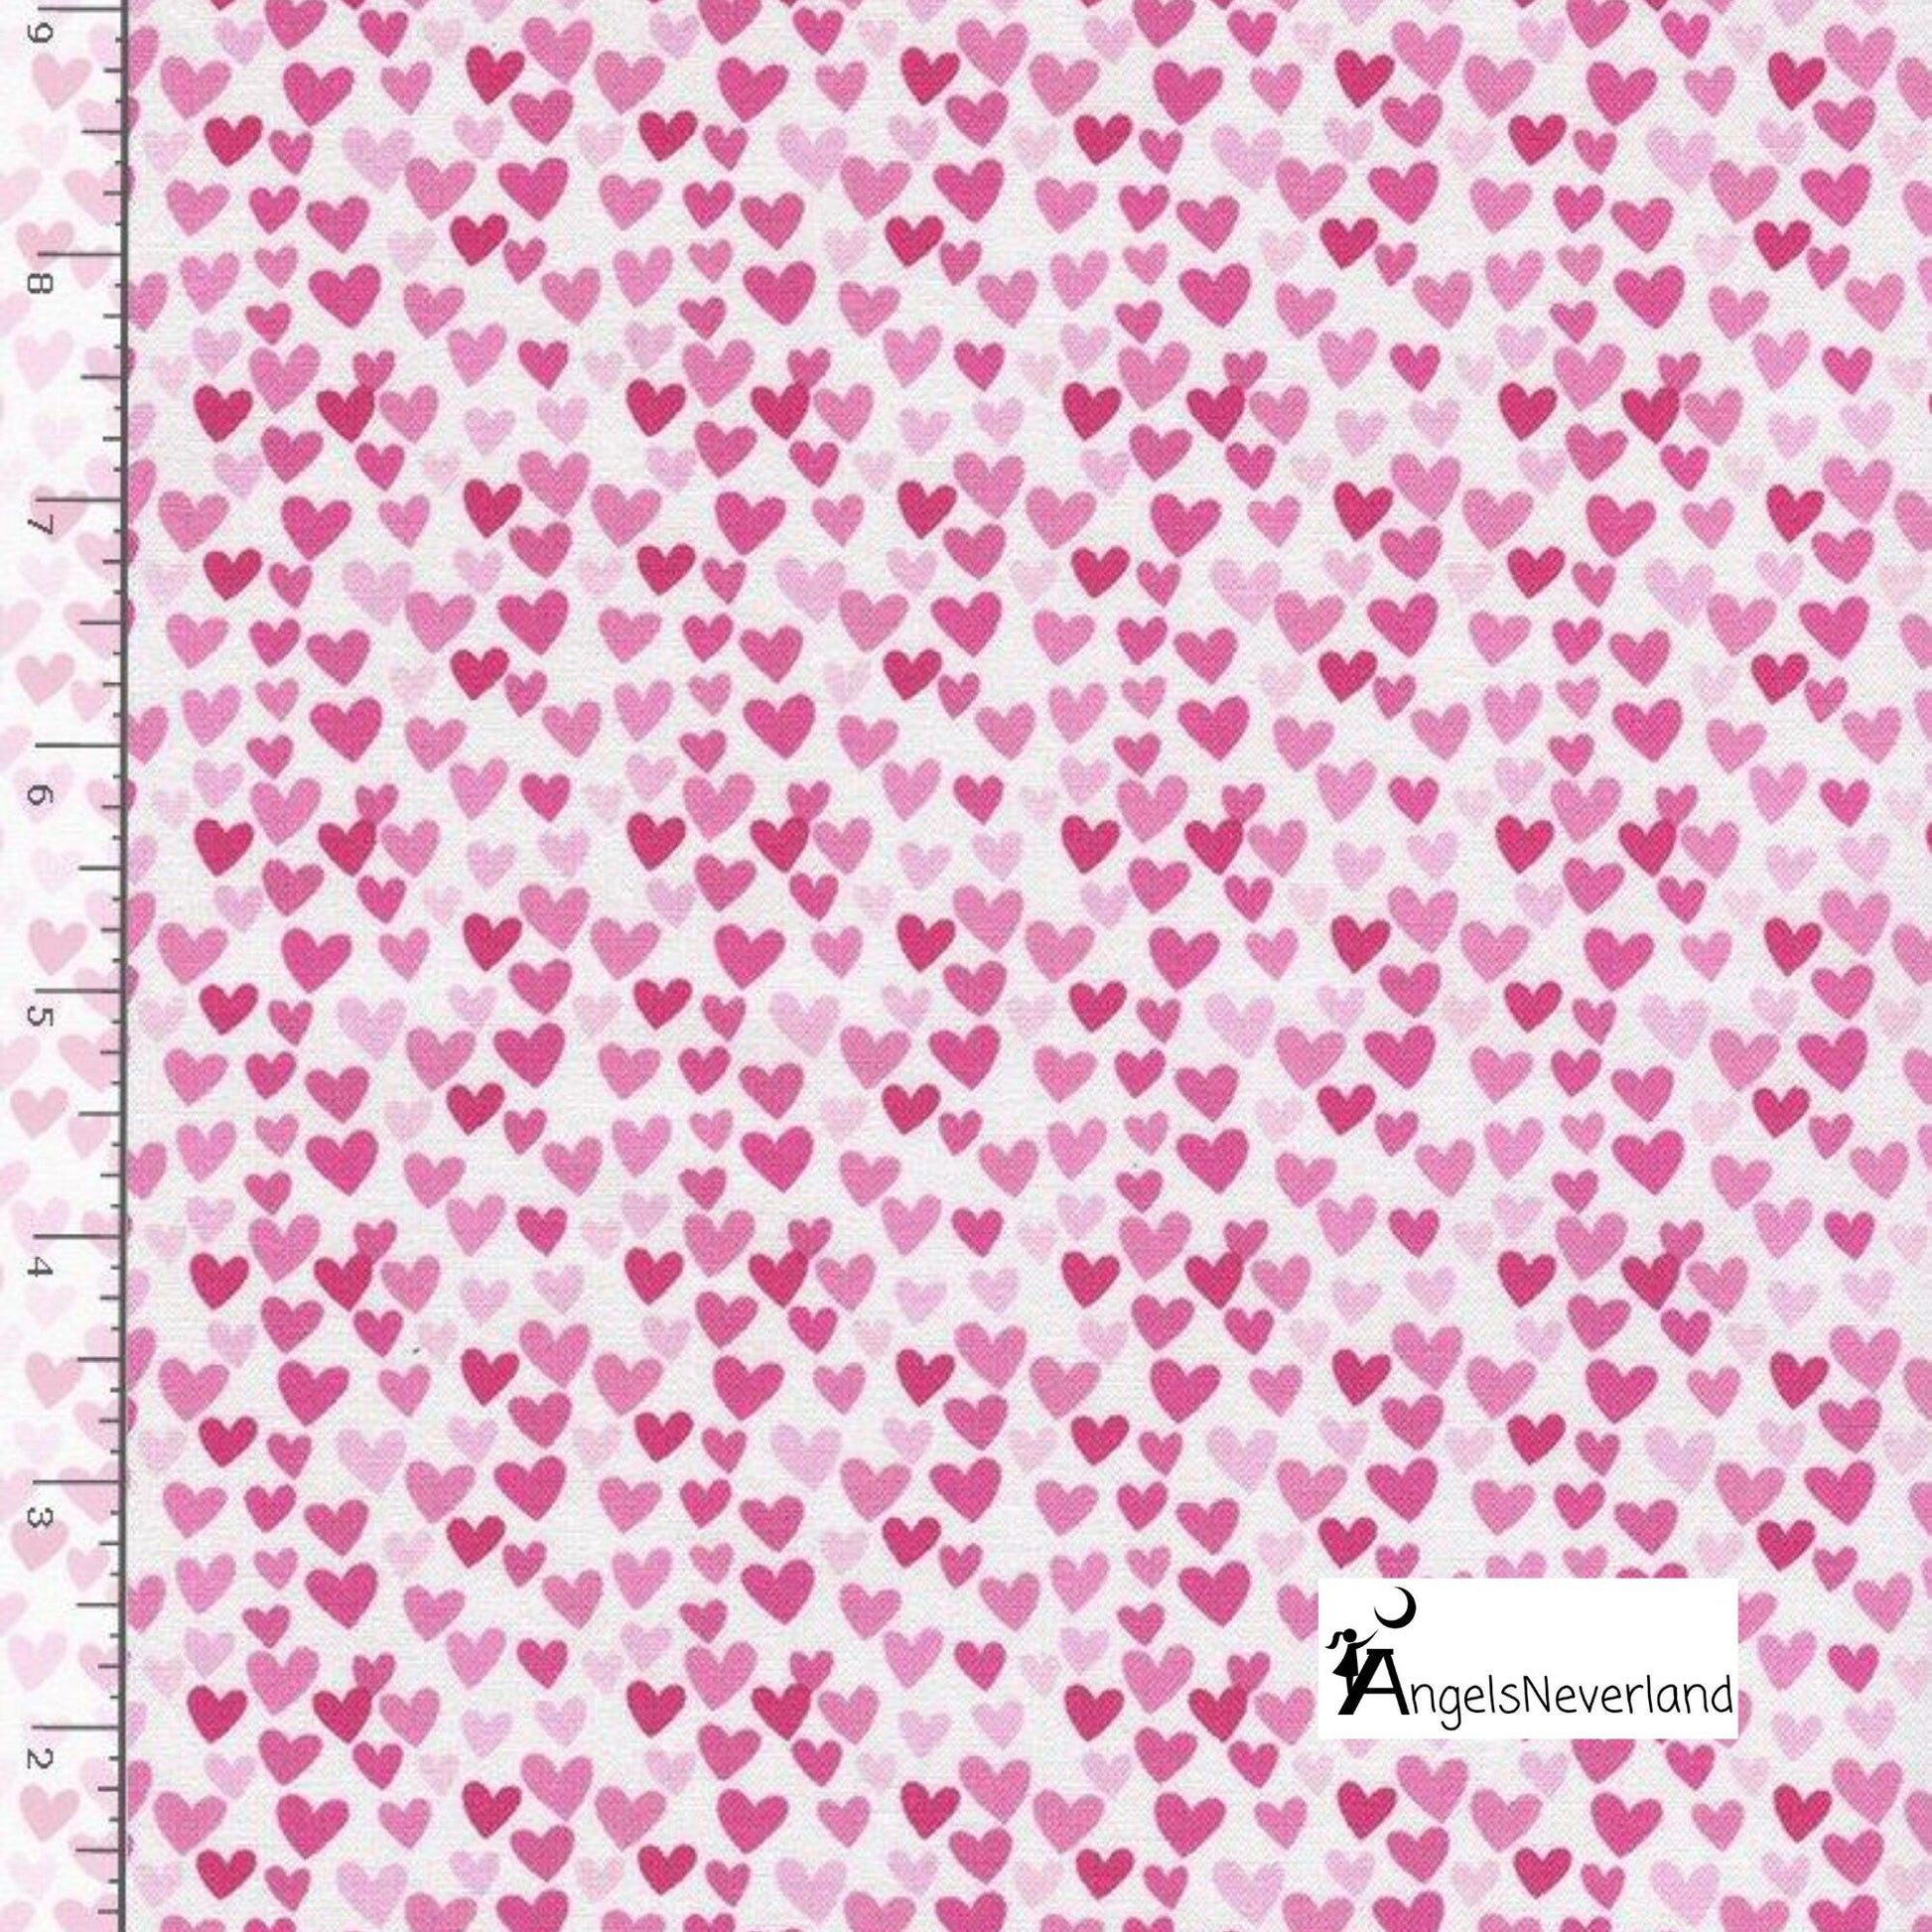 Timeless Treasures Fabric 2 yards (72"x44") / Pink Hearts Timeless Treasures All over sloths fabric or small pink hearts fabric